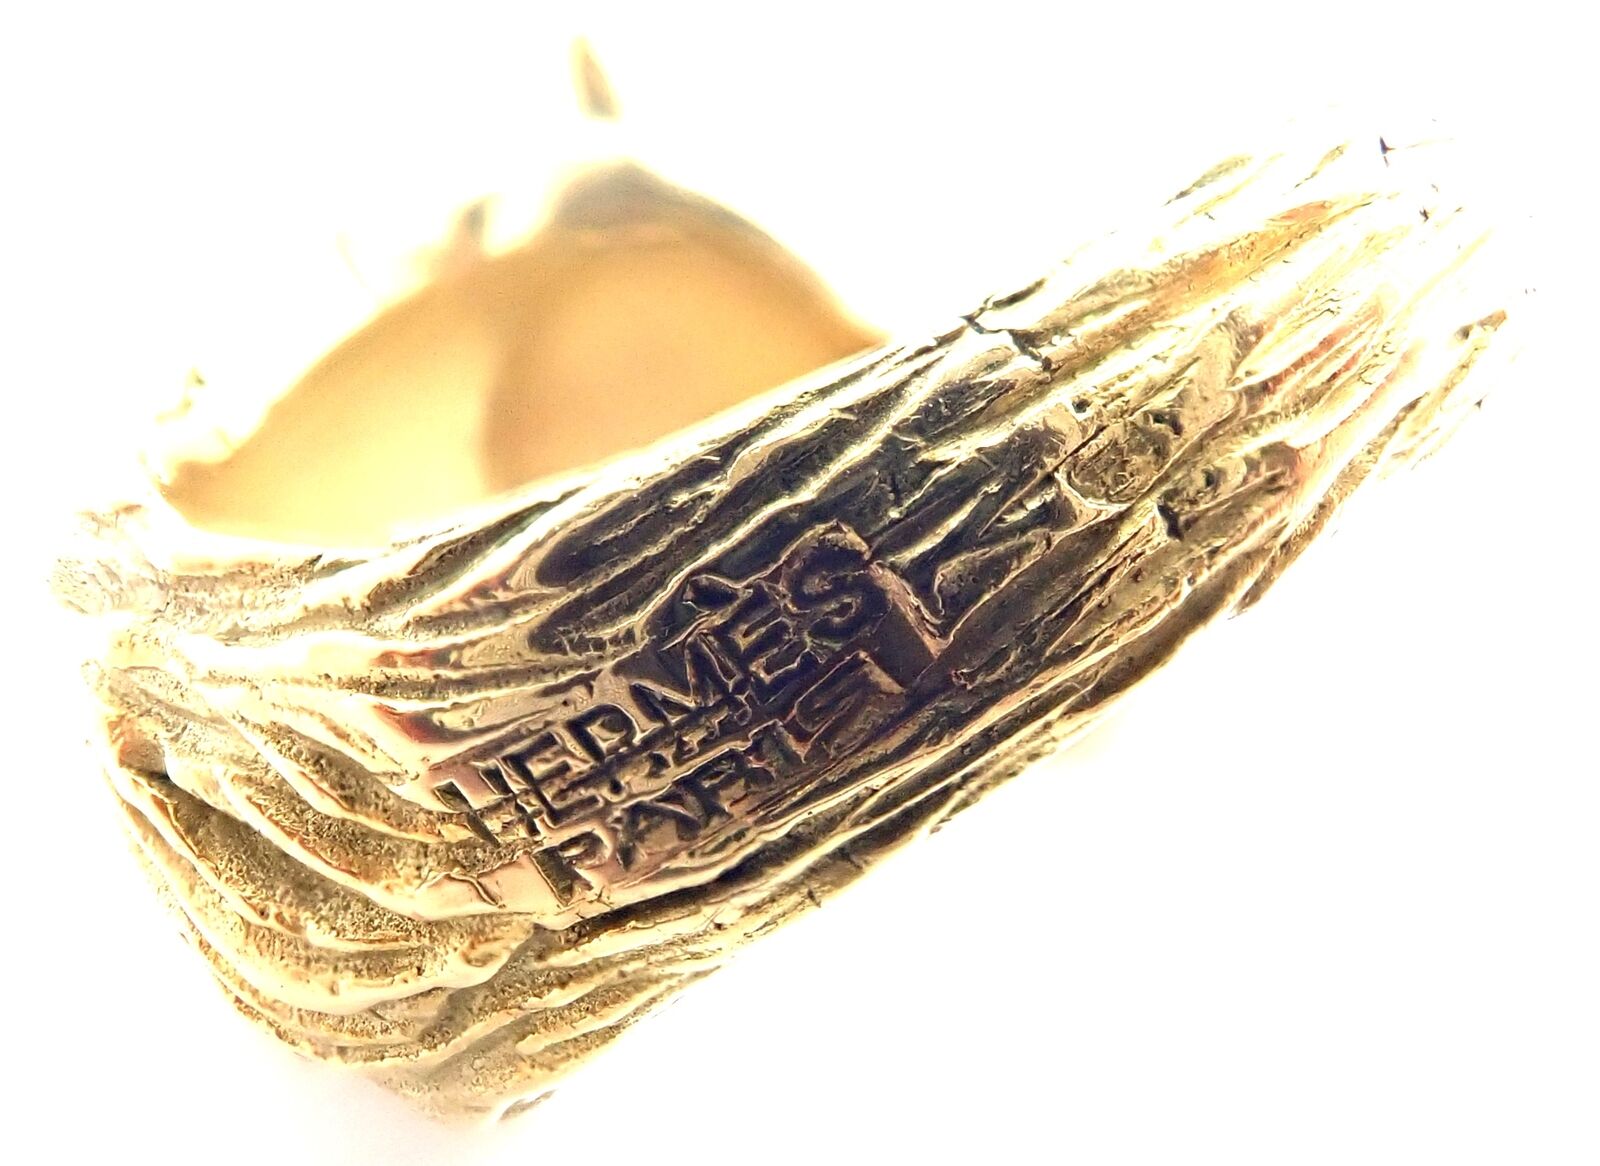 Hermes Jewelry & Watches:Fine Jewelry:Rings Authentic! Vintage Hermes 18K Yellow Gold Horse Band Ring